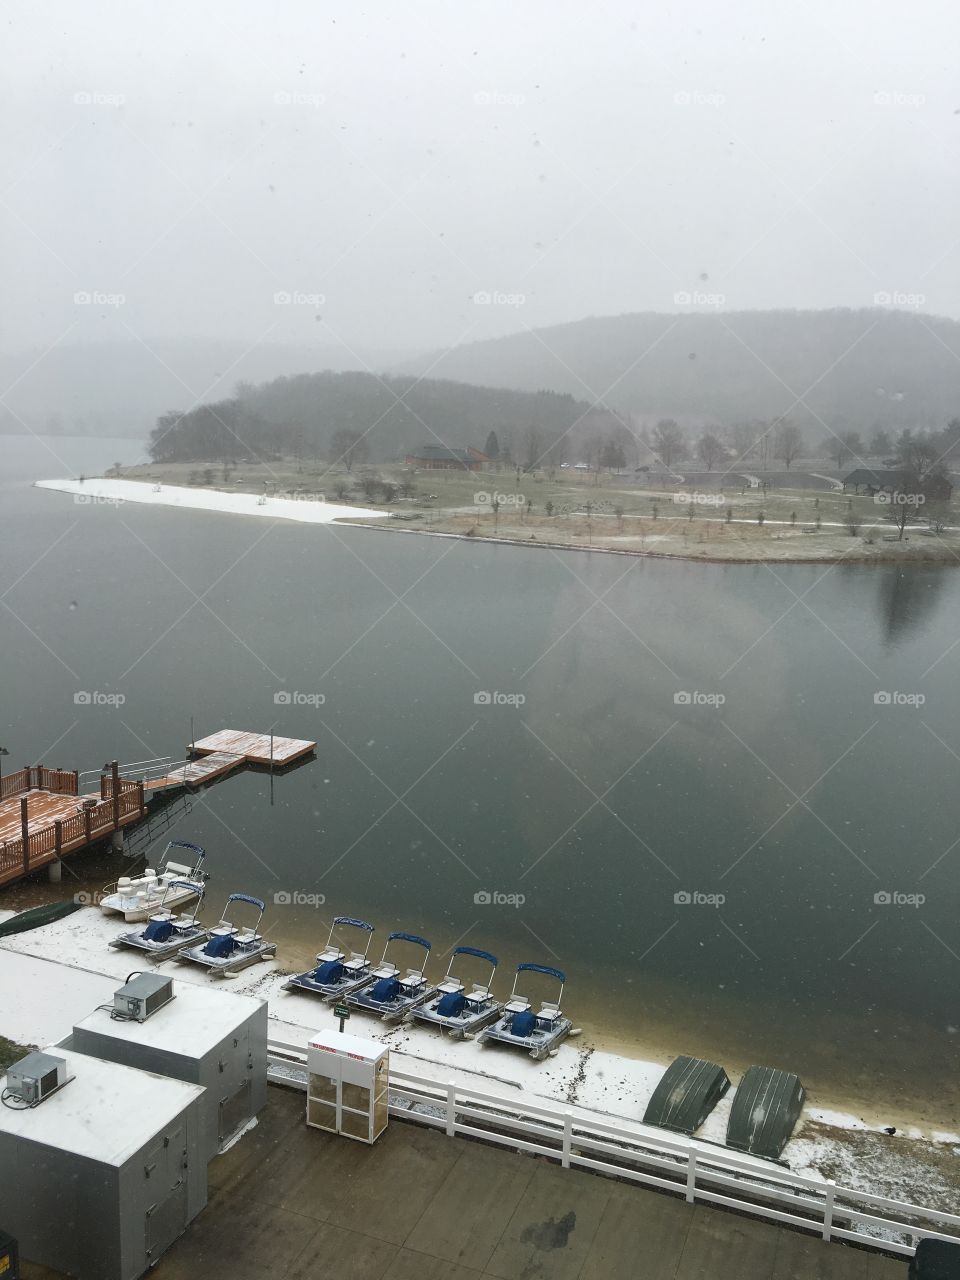 Snowing on the lake